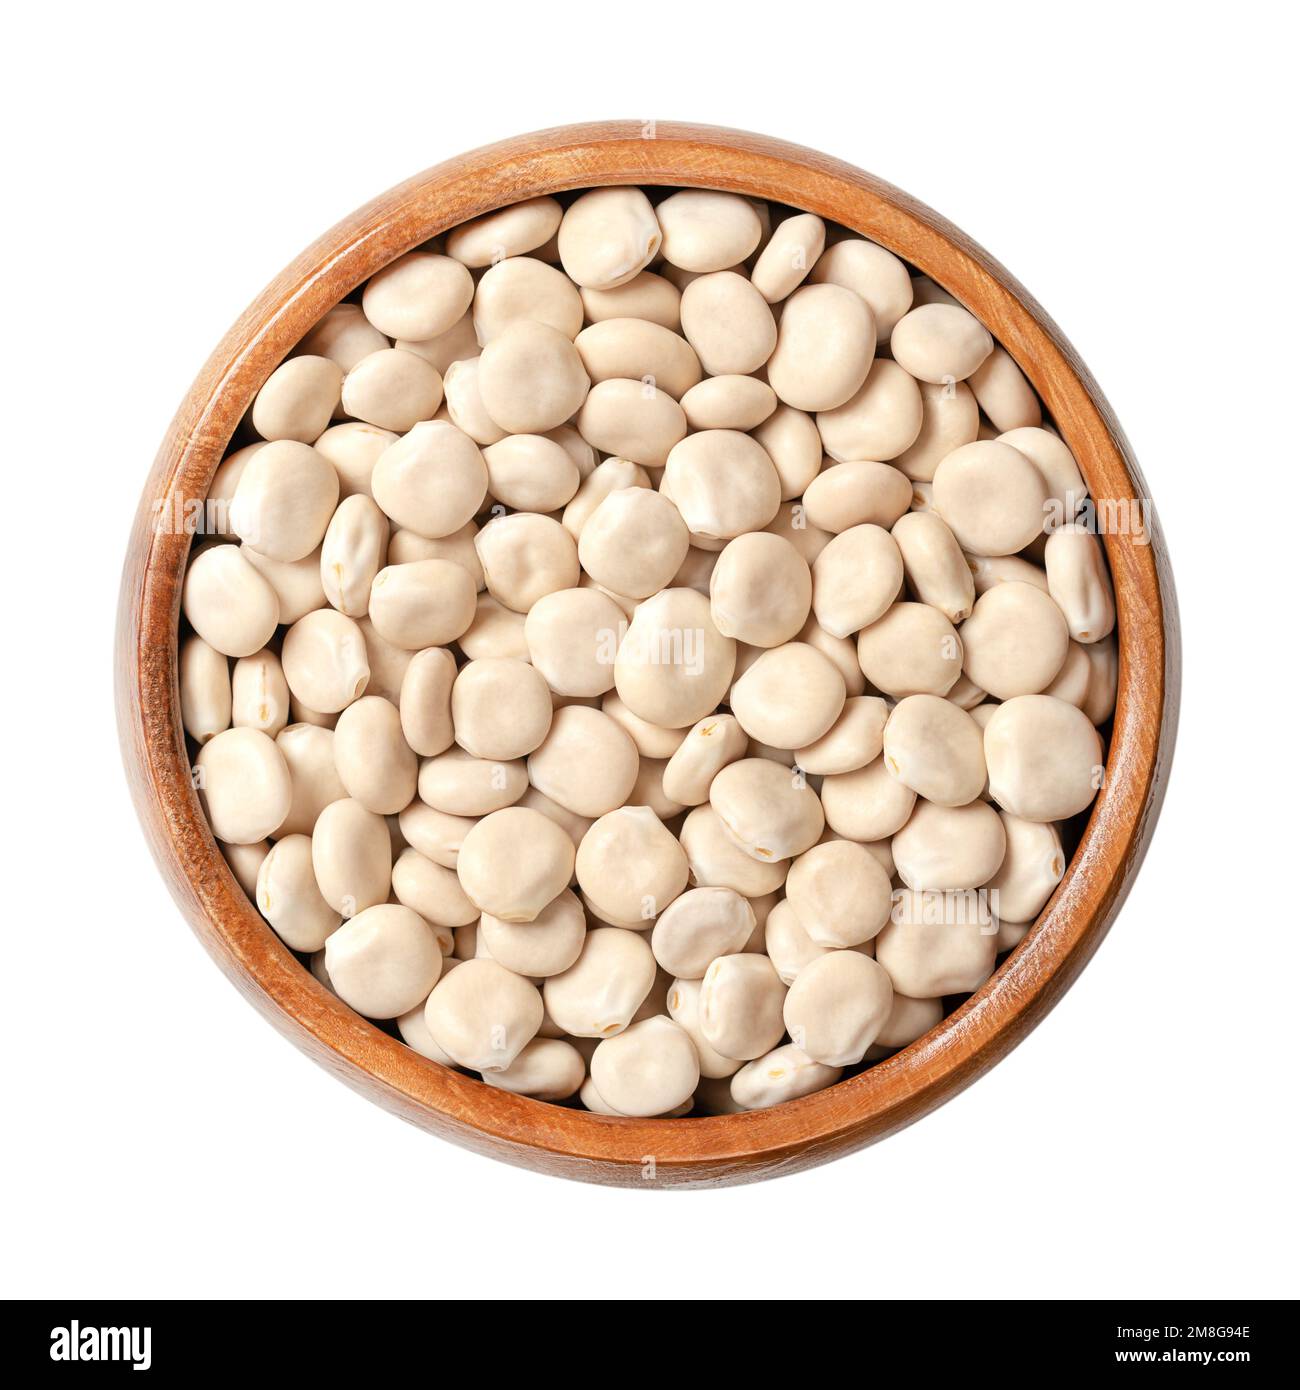 Dried sweet lupin beans, in a wooden bowl. Also known as white lupin or field lupine. Seeds of Lupinus albus, with low content of antinutrients. Stock Photo